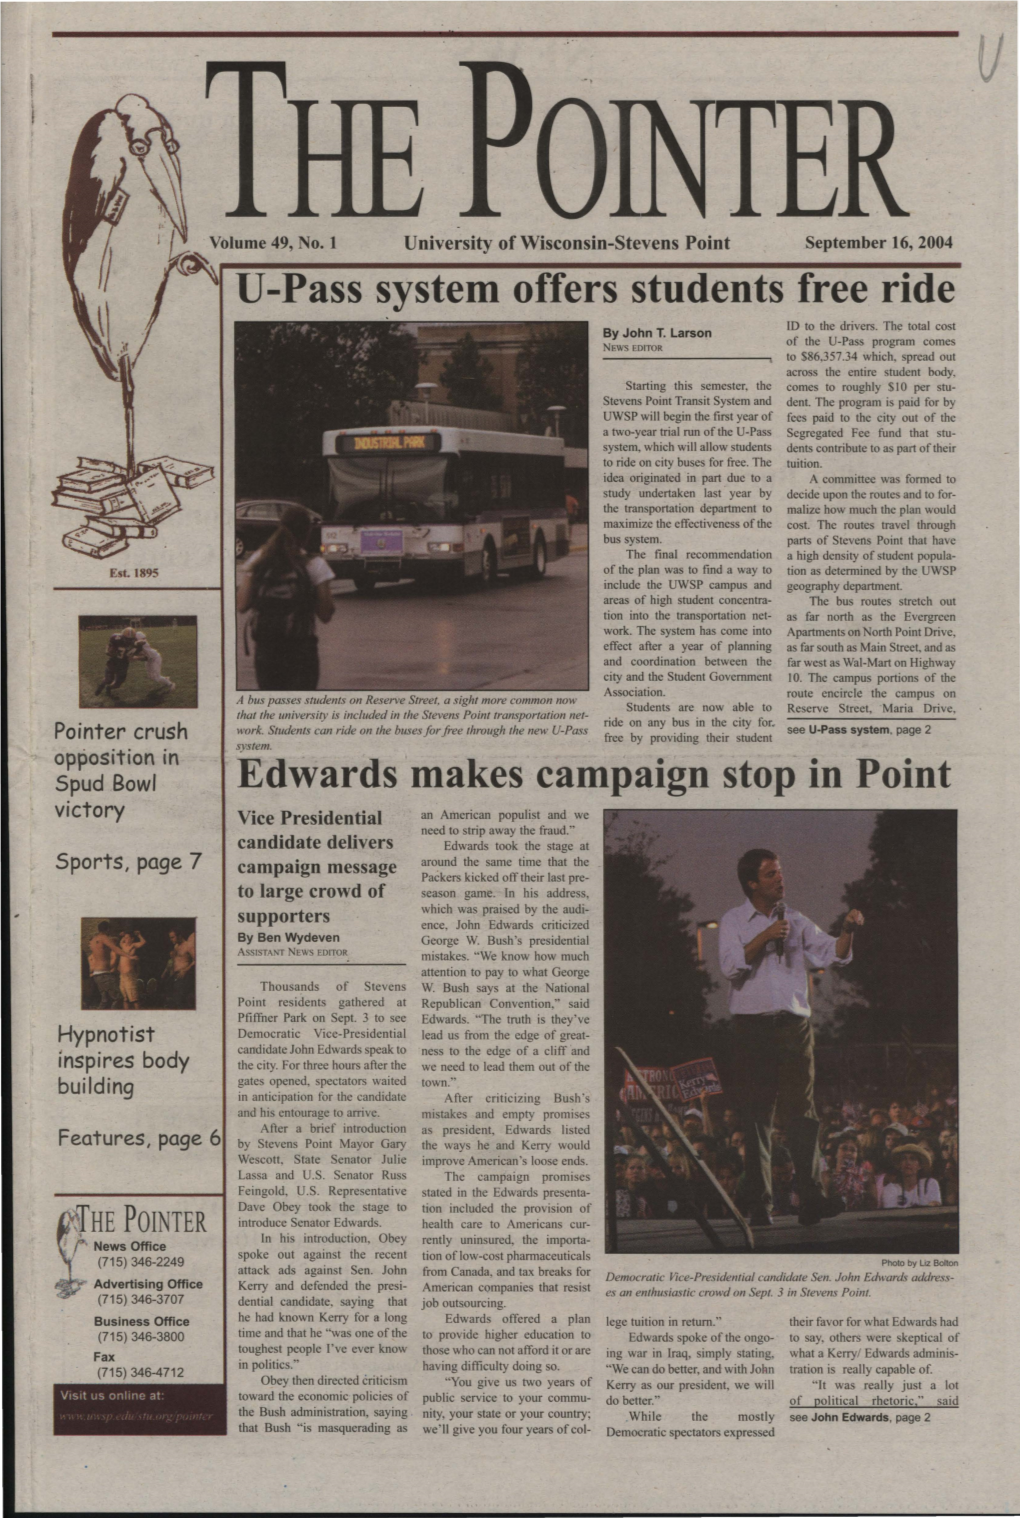 U-Pass System Offers Students Free Ride Edwards ·Makes· Campaign